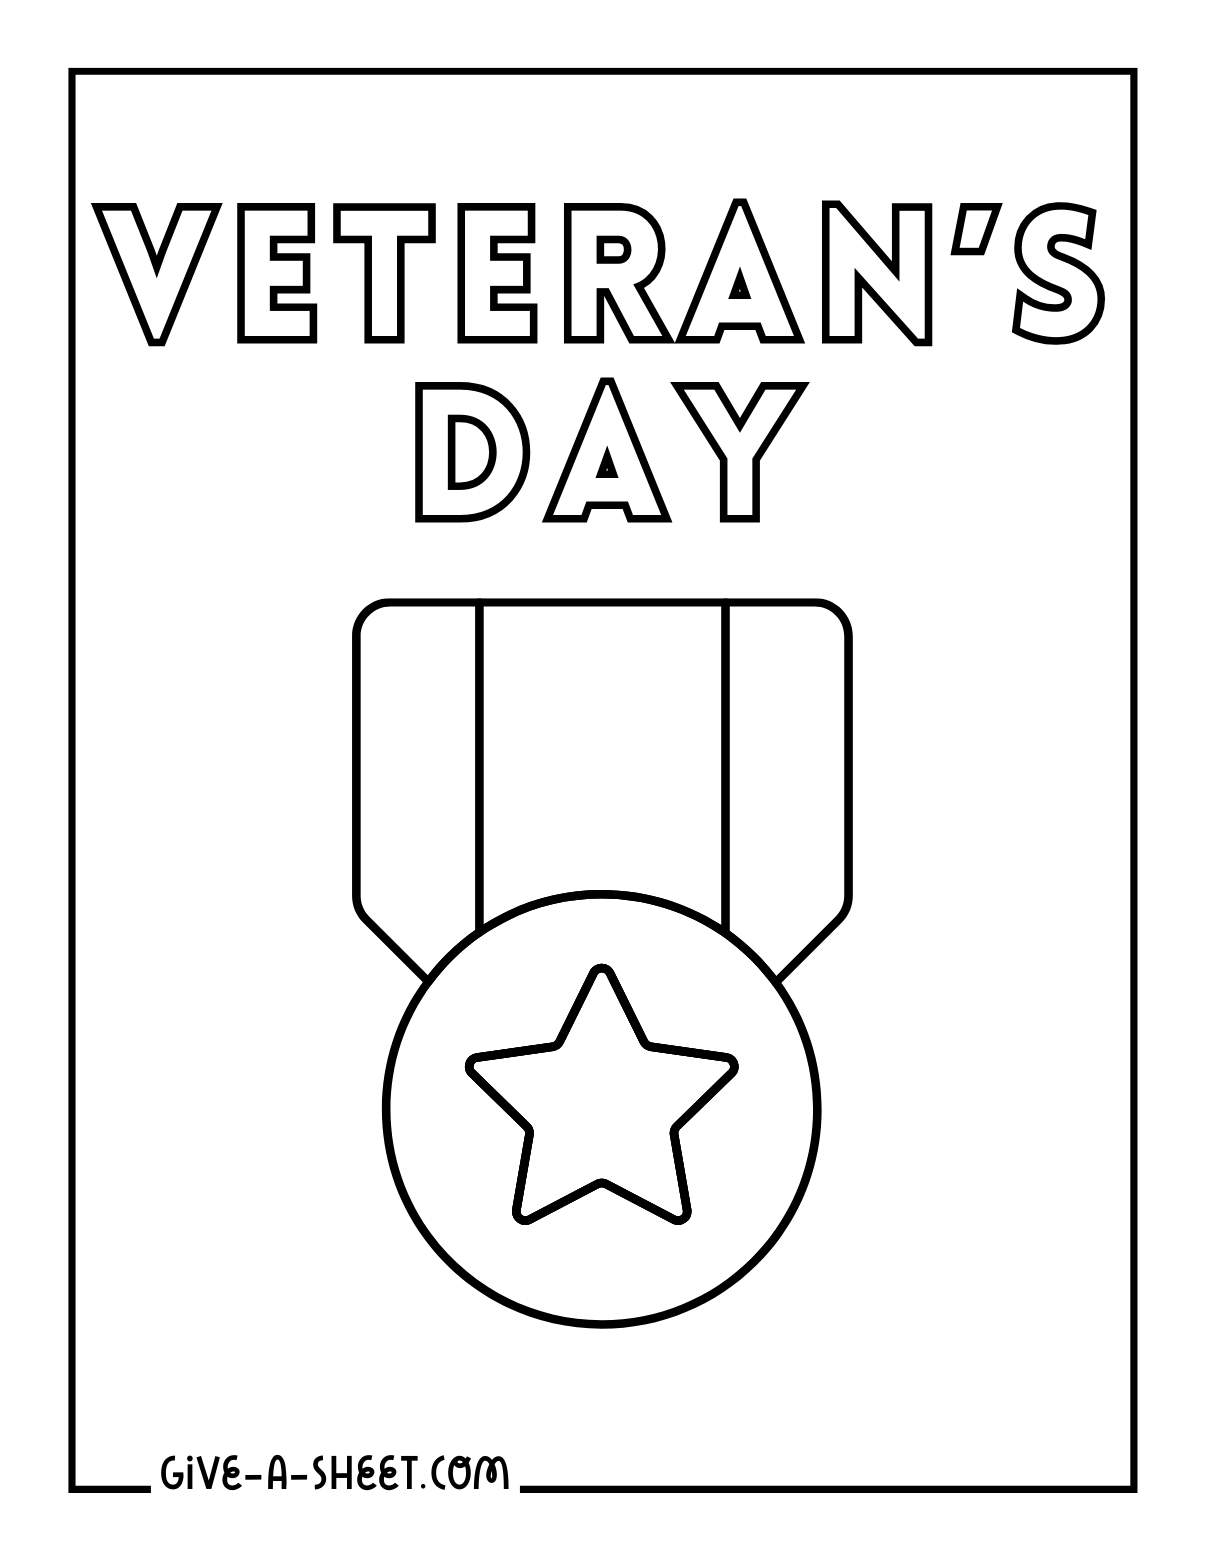 Armistice day coloring page for preschool.